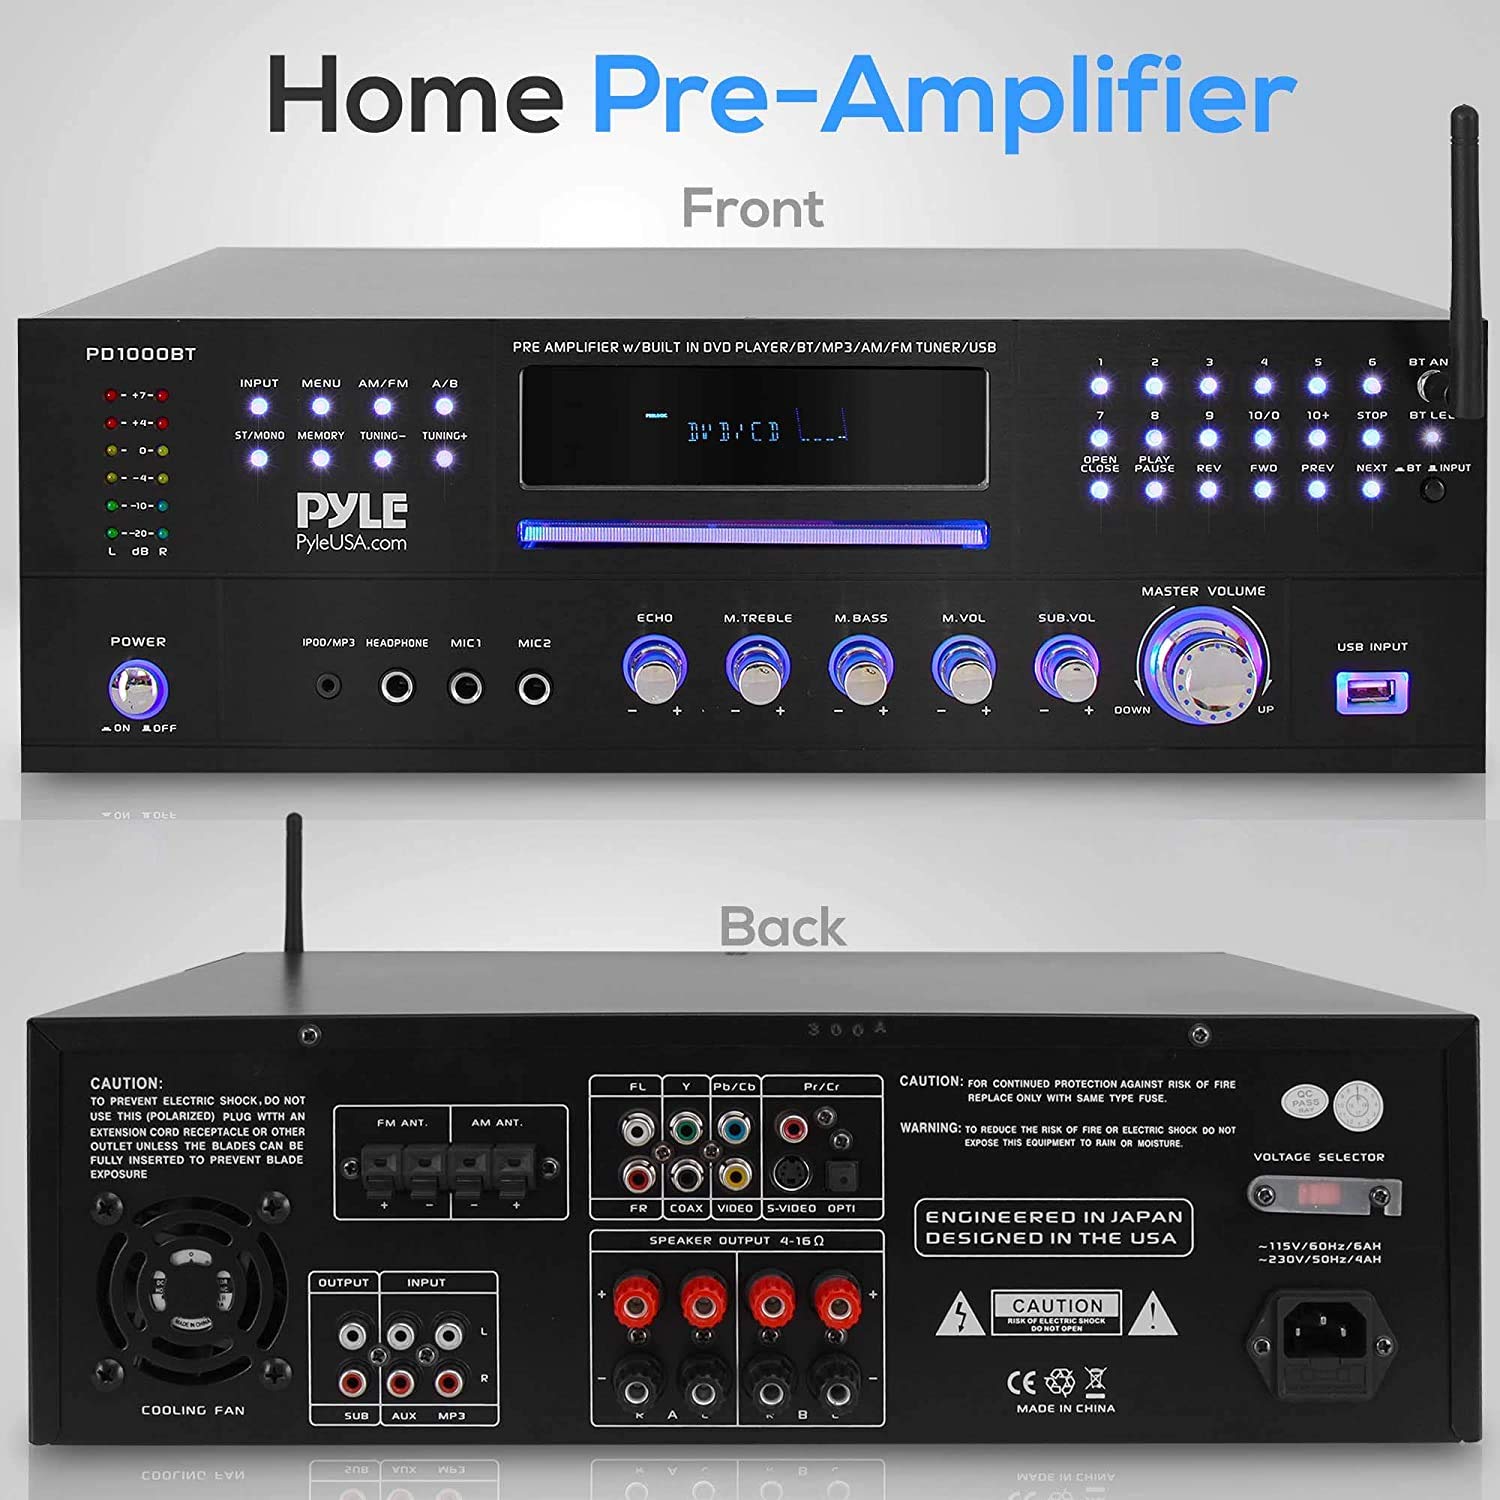 PYLE 4 Channel Pre Amplifier Receiver - 1000 Watt Rack Mount Bluetooth Home Theater-Stereo Surround Sound Preamp Receiver W/Audio/Video System, CD/DVD Player, AM/FM Radio, MP3/USB Reader - PD1000BT